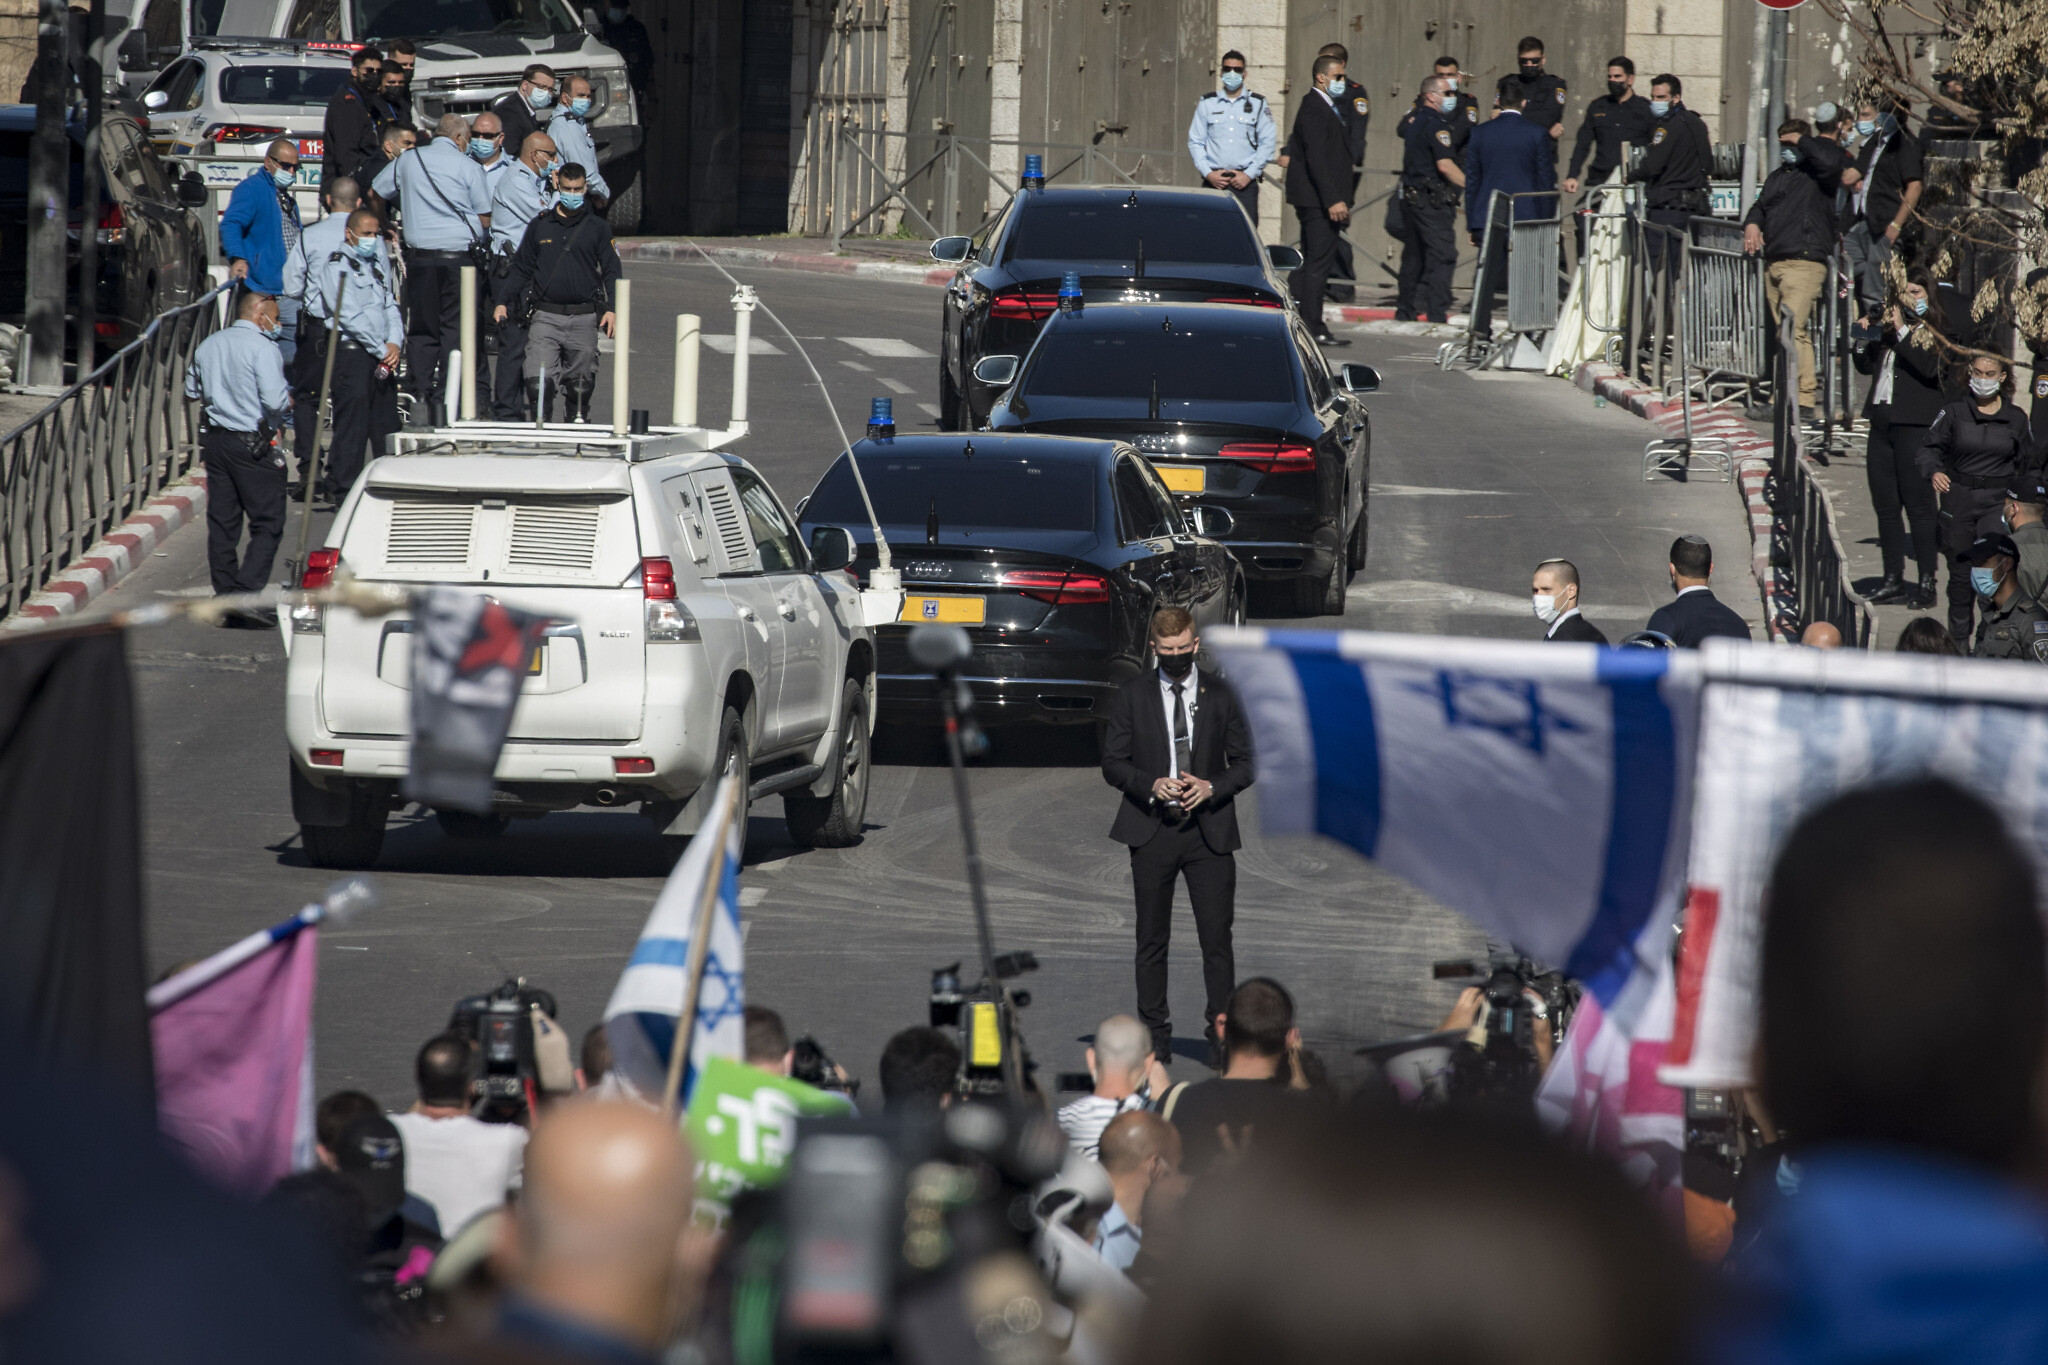 Netanyahu’s motorcade said to include ambulance since his pacemaker was installed